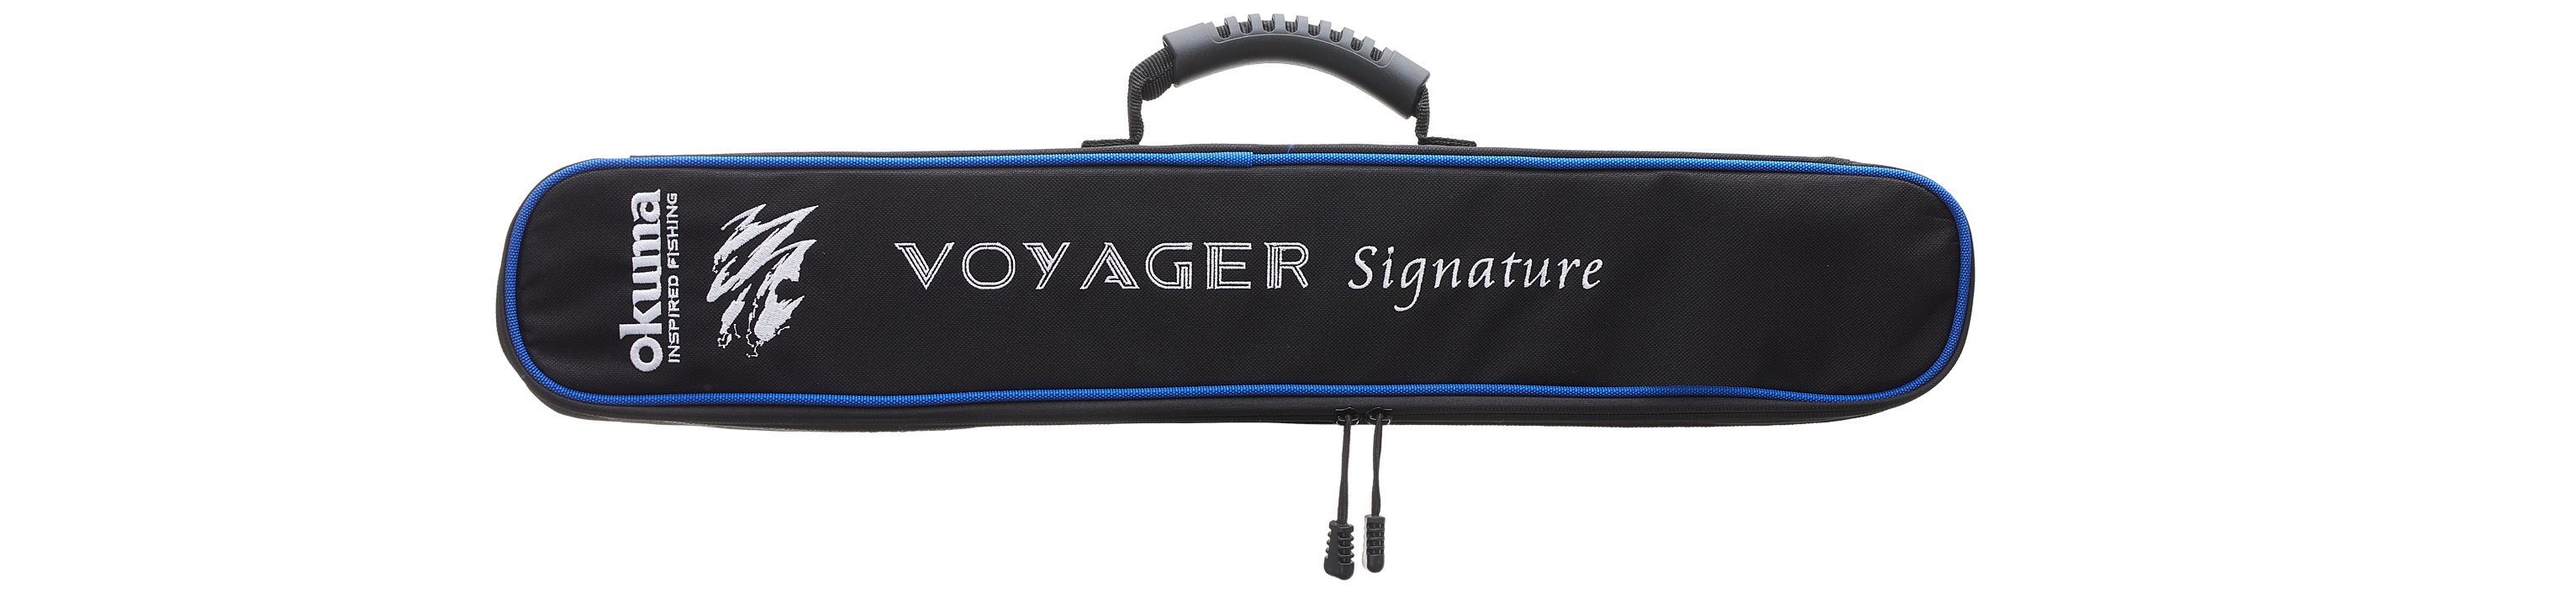 Travel Rods in Tubes-Voyager Signature Surf Rods! 